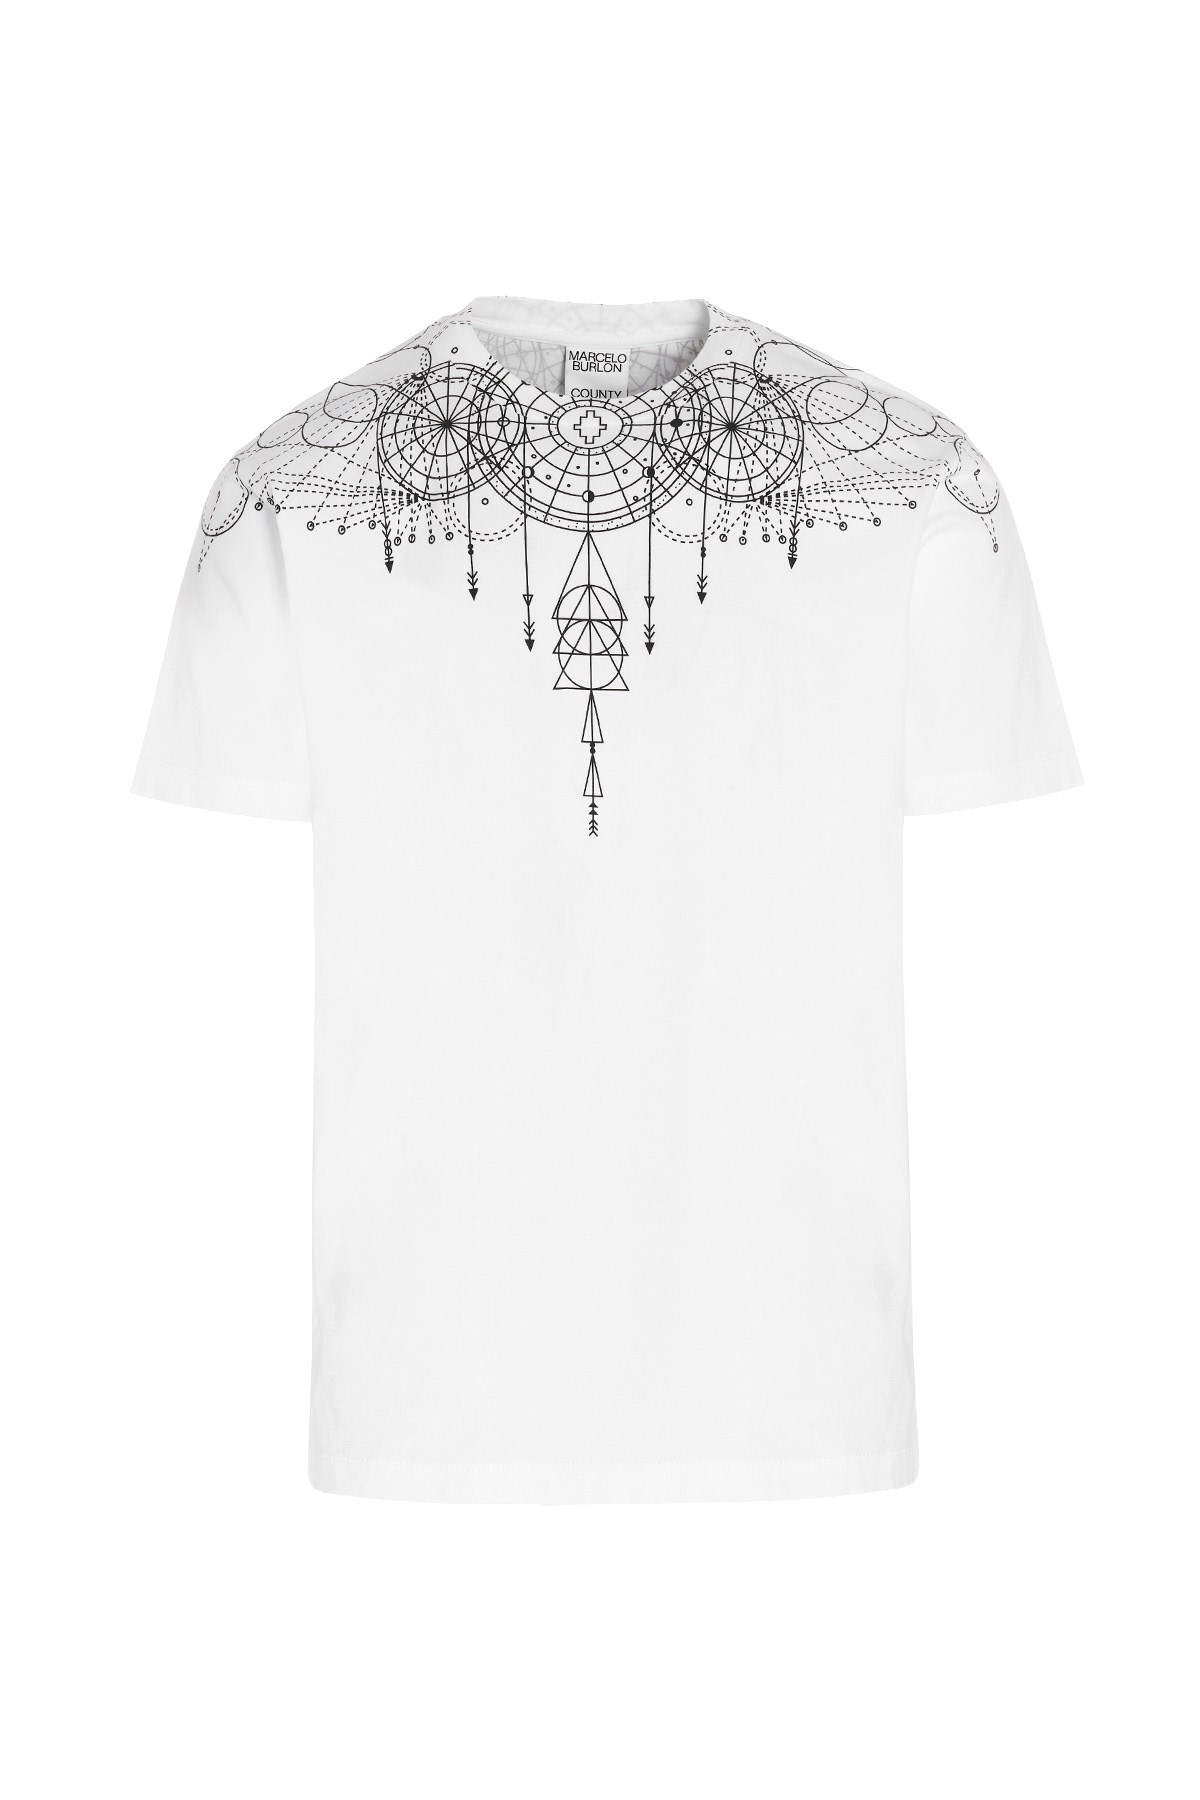 MARCELO BURLON - COUNTY OF MILAN T-Shirt 'Astral Wings'